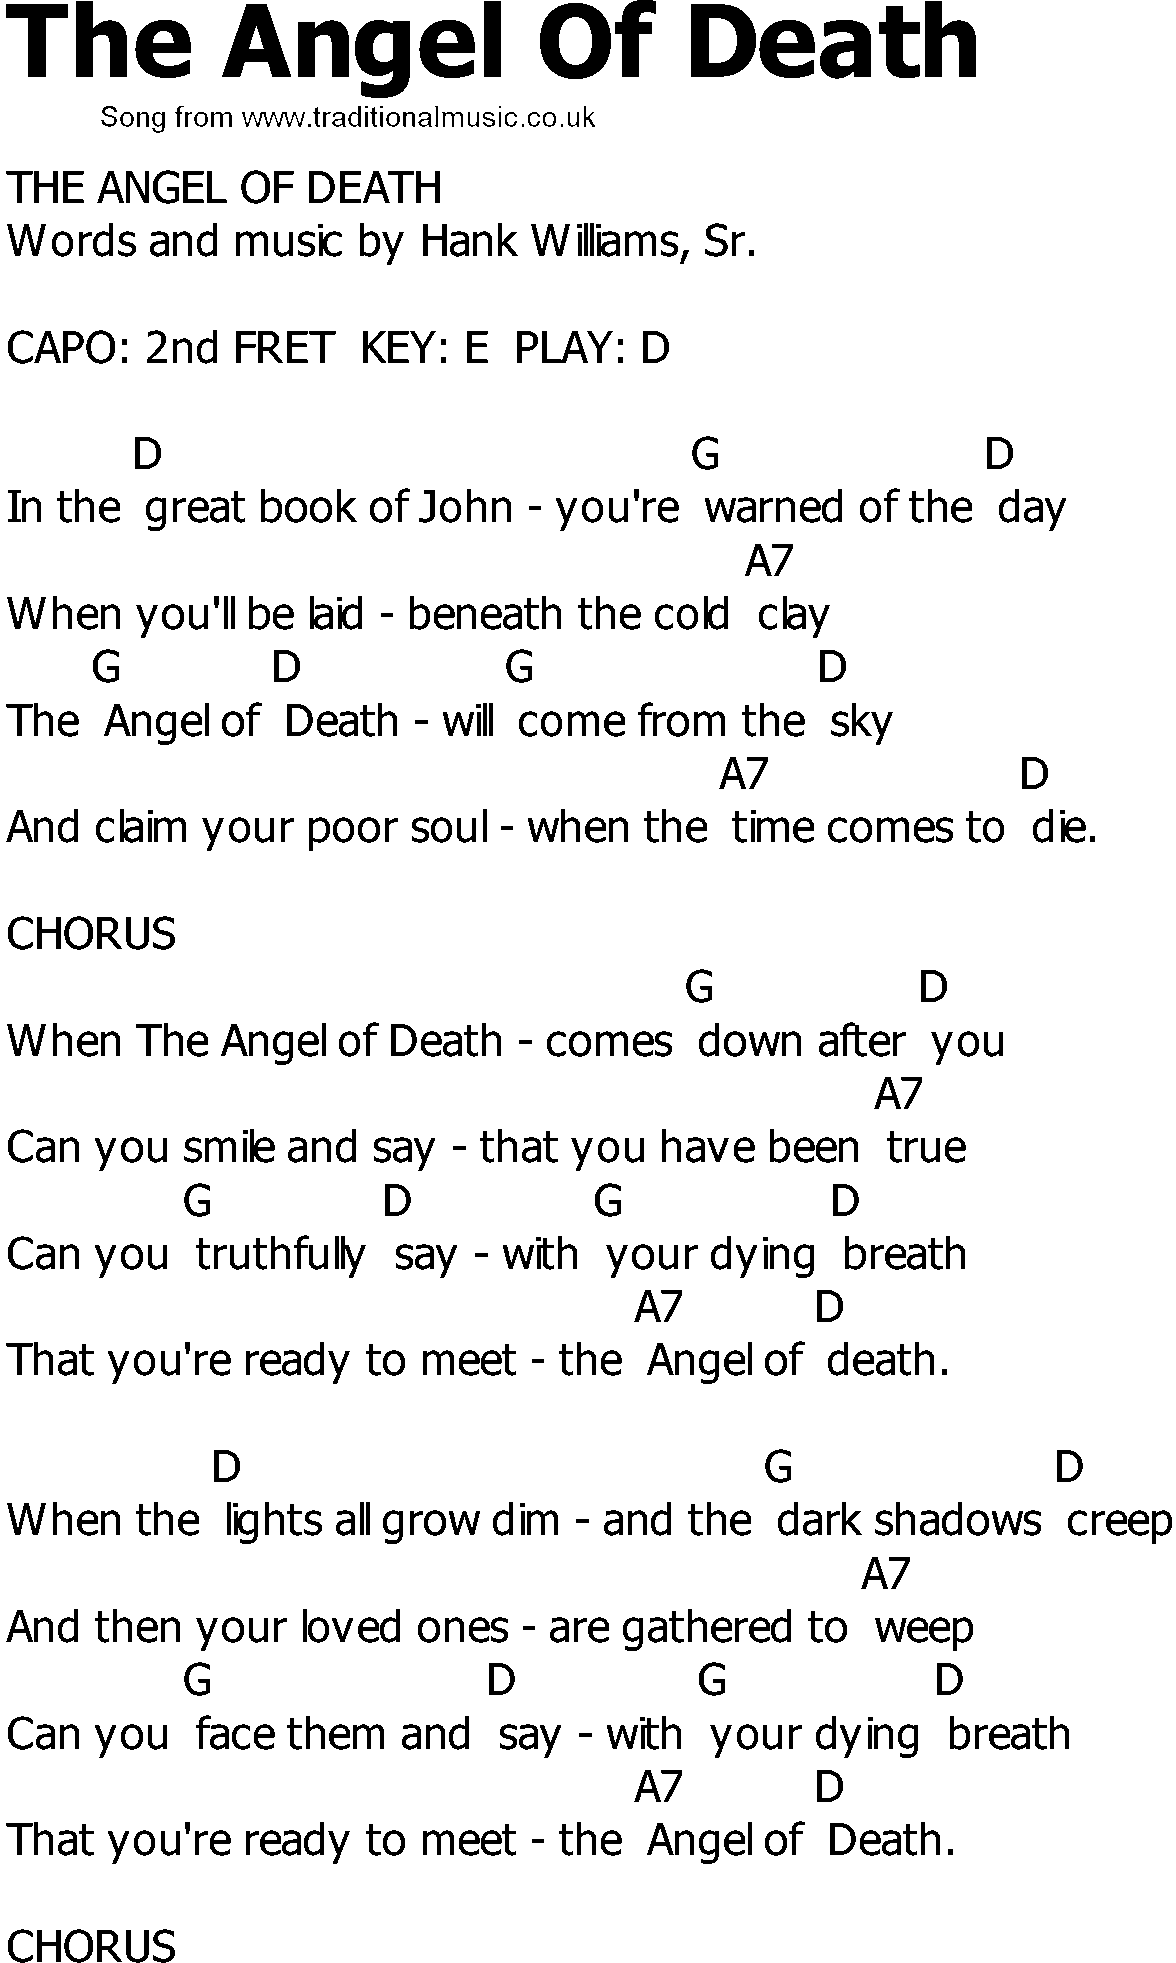 Old Country song lyrics with chords - The Angel Of Death